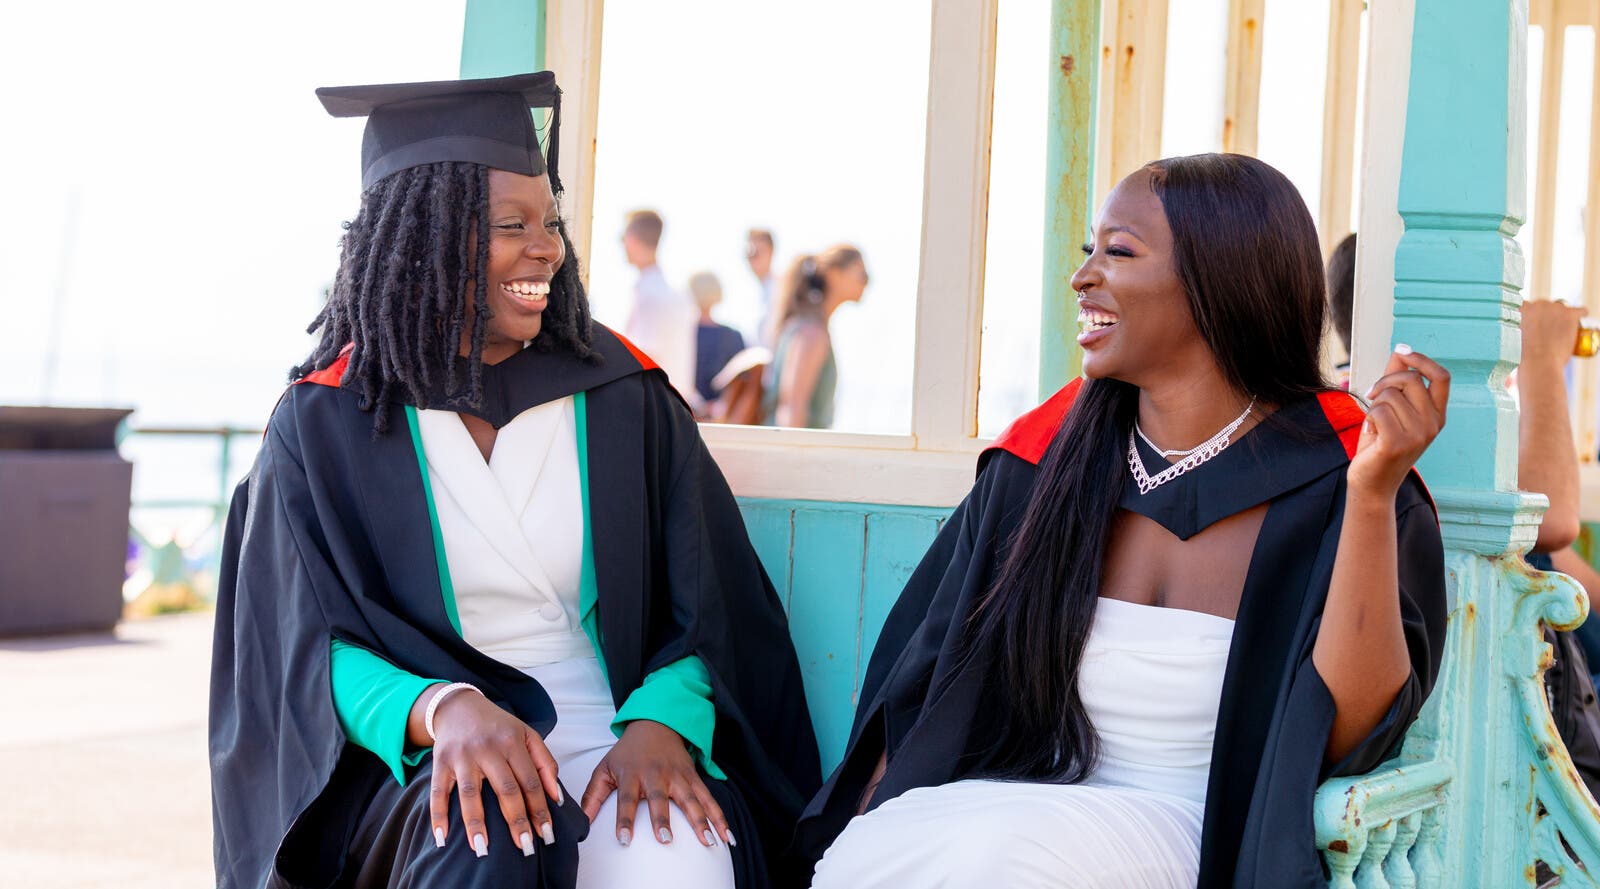 Two students in their graduation robes.